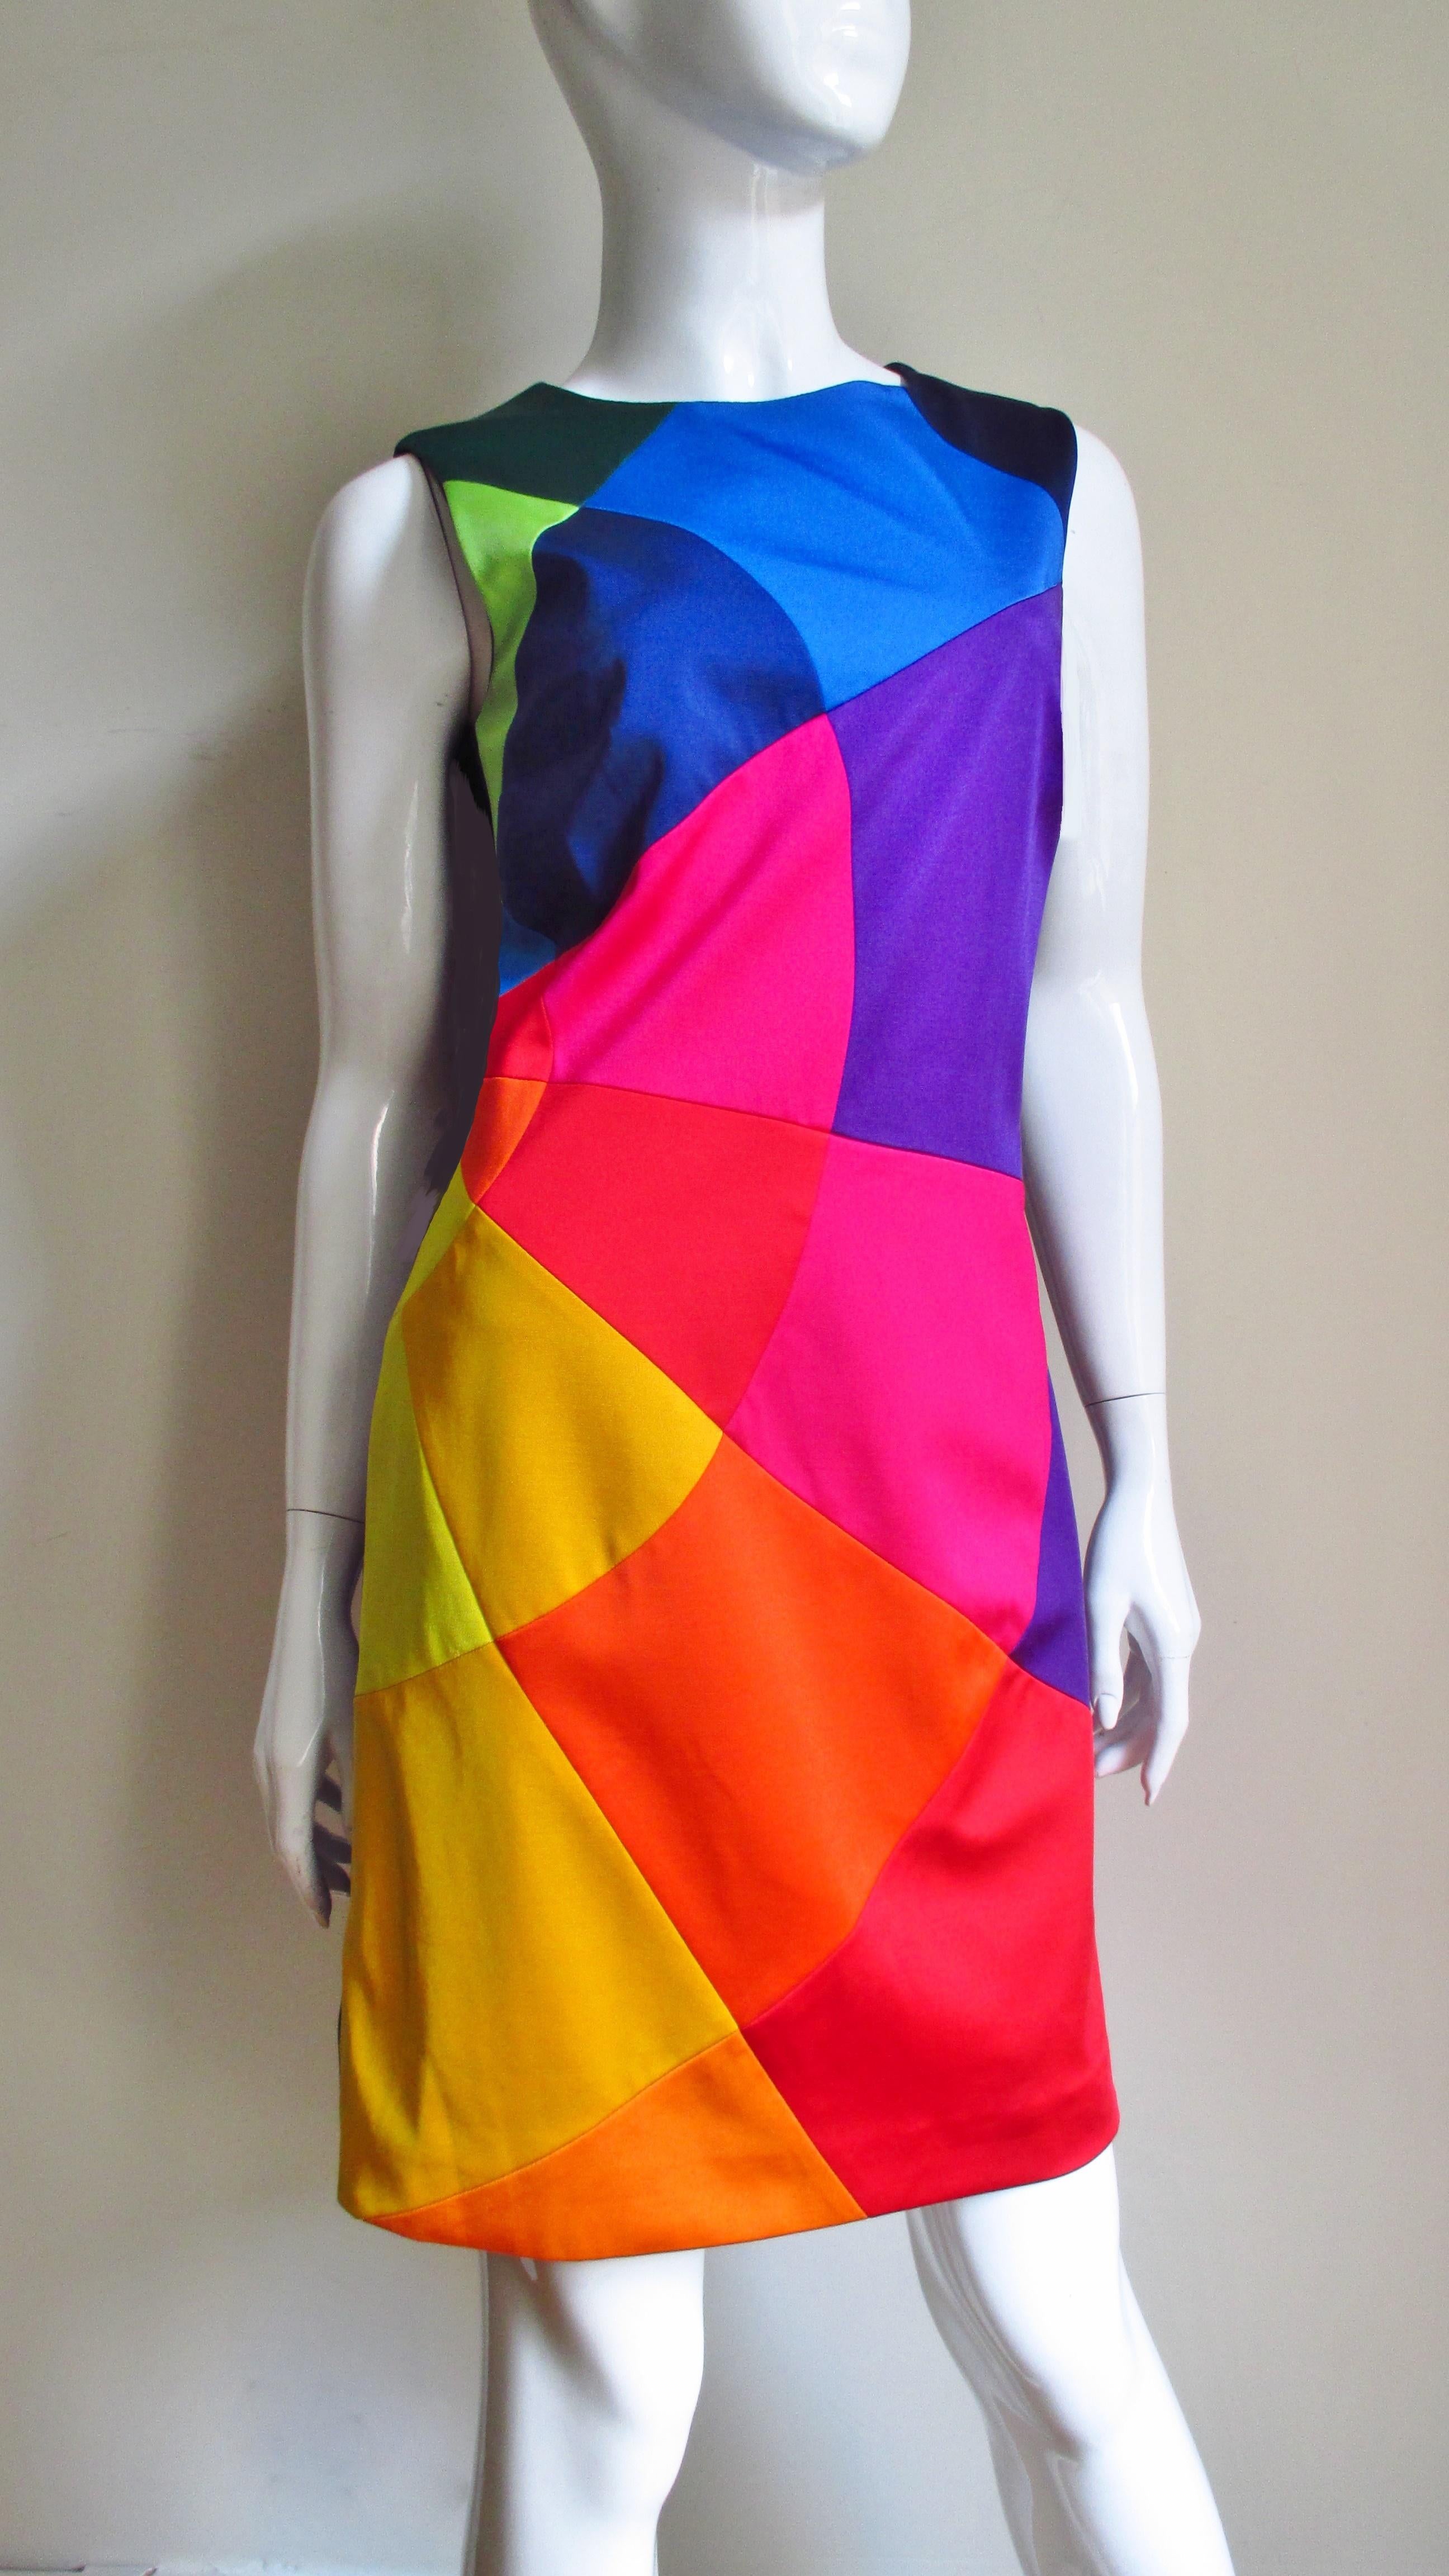 A fabulous colorful dress with a bit of stretch from Moschino.  It is is sleeveless with a crew neck and incredible brightly colored shapes each individually sewn together comprising the front of the dress, the back is solid black.  It is lined in